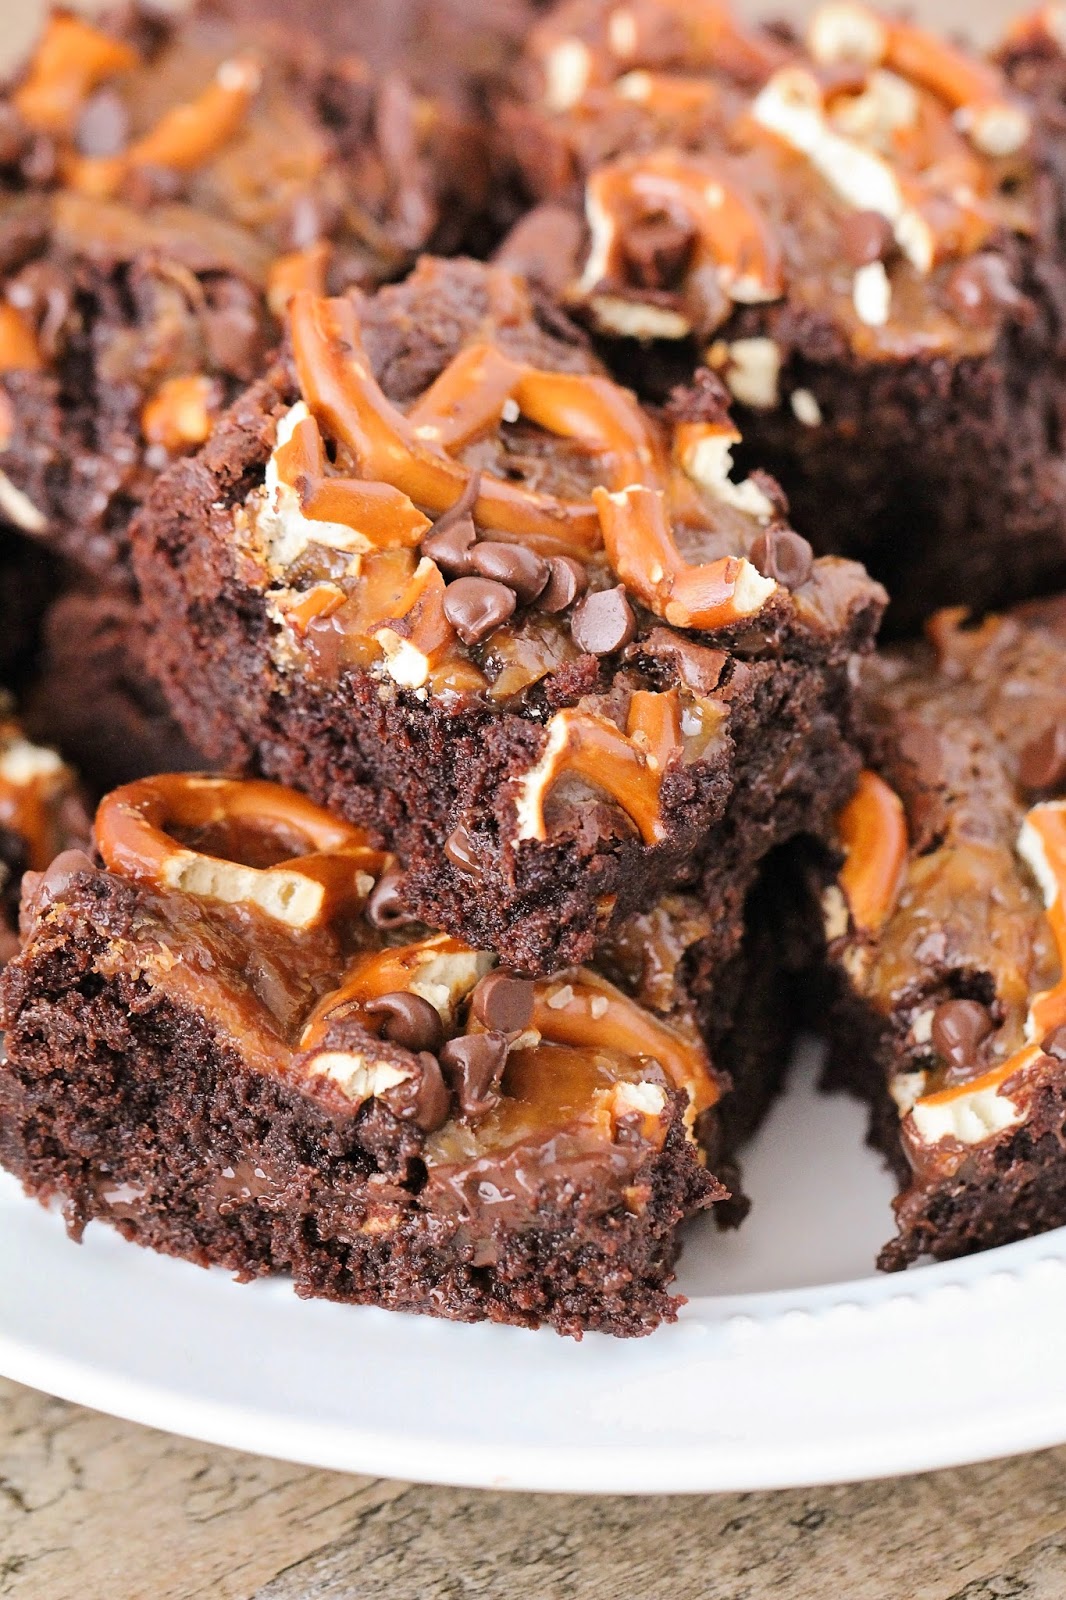 These rich and fudgy caramel pretzel brownies are the perfect mix of salty and sweet, and have an amazing texture. So chocolatey and delicious!